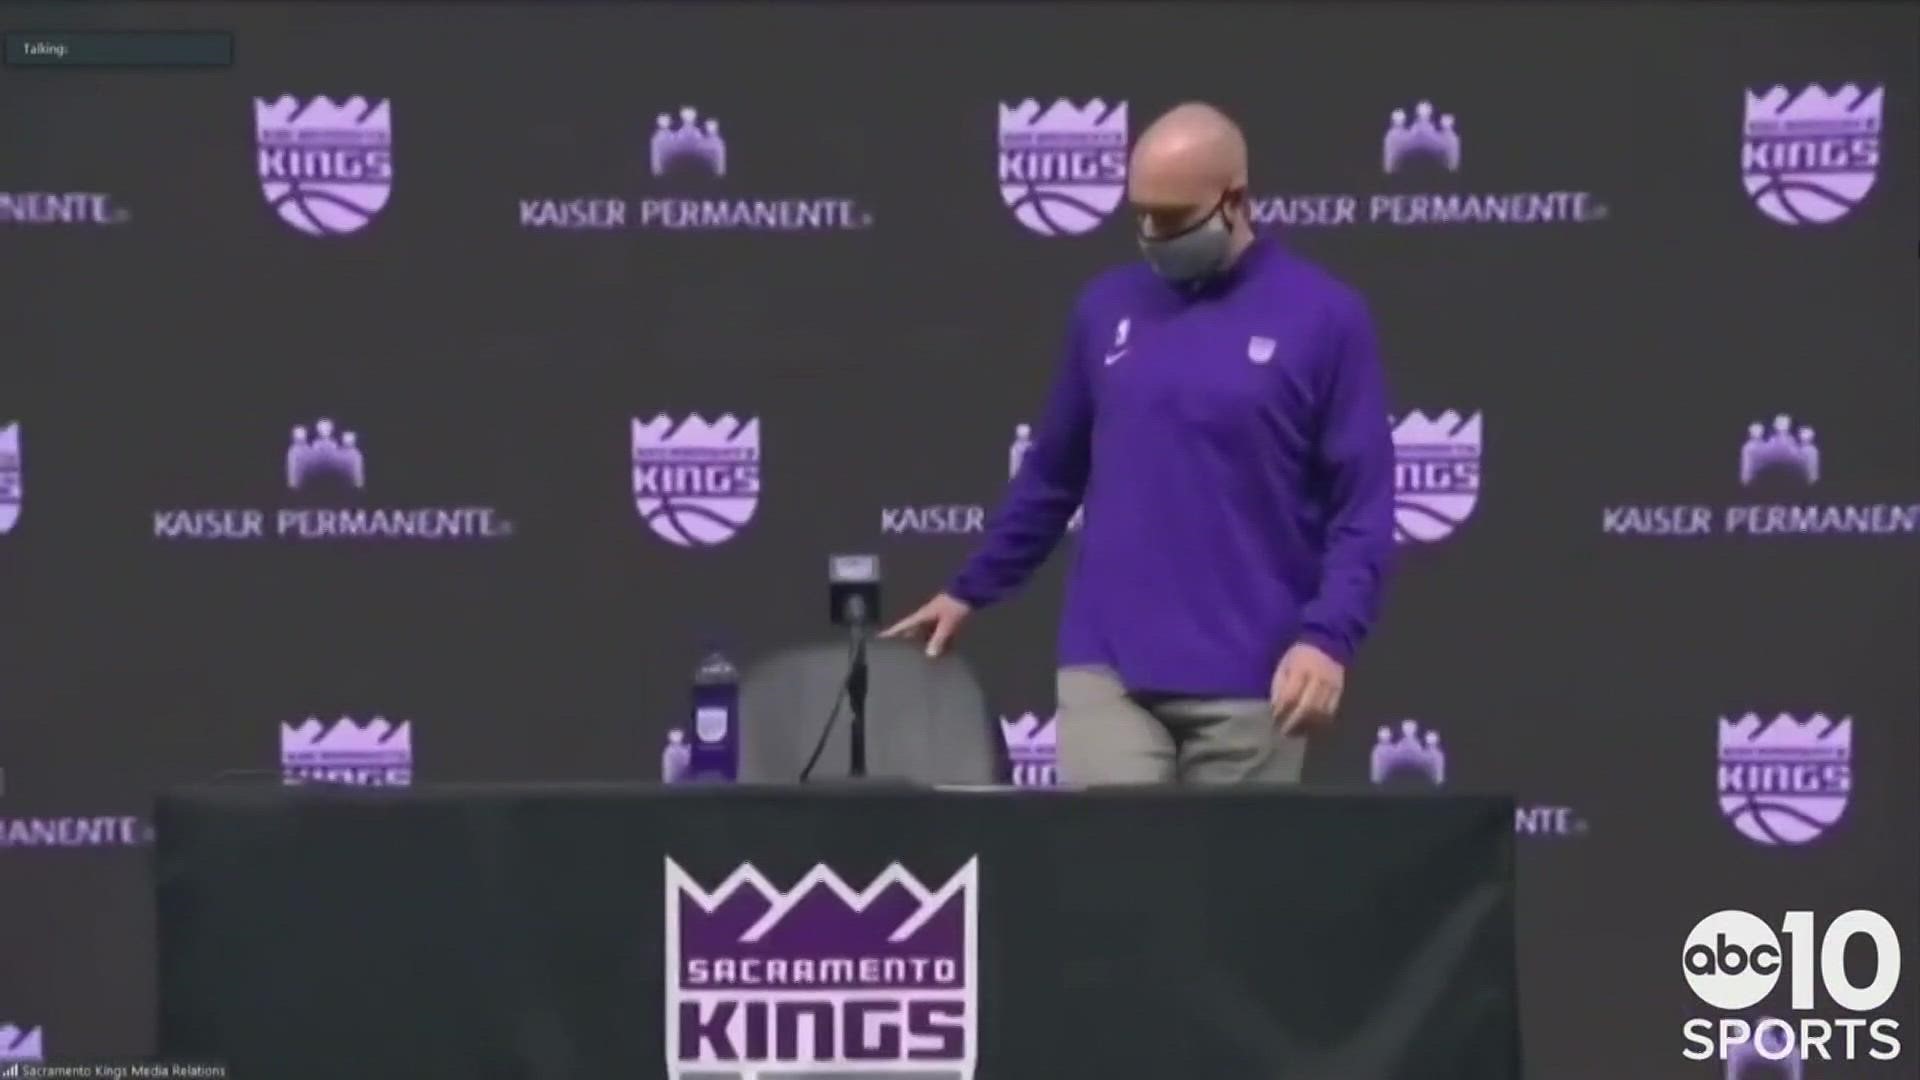 New Sacramento Kings general manager Monte McNair speaks with the media via Zoom to talk about his observations of the team and the challenges ahead.